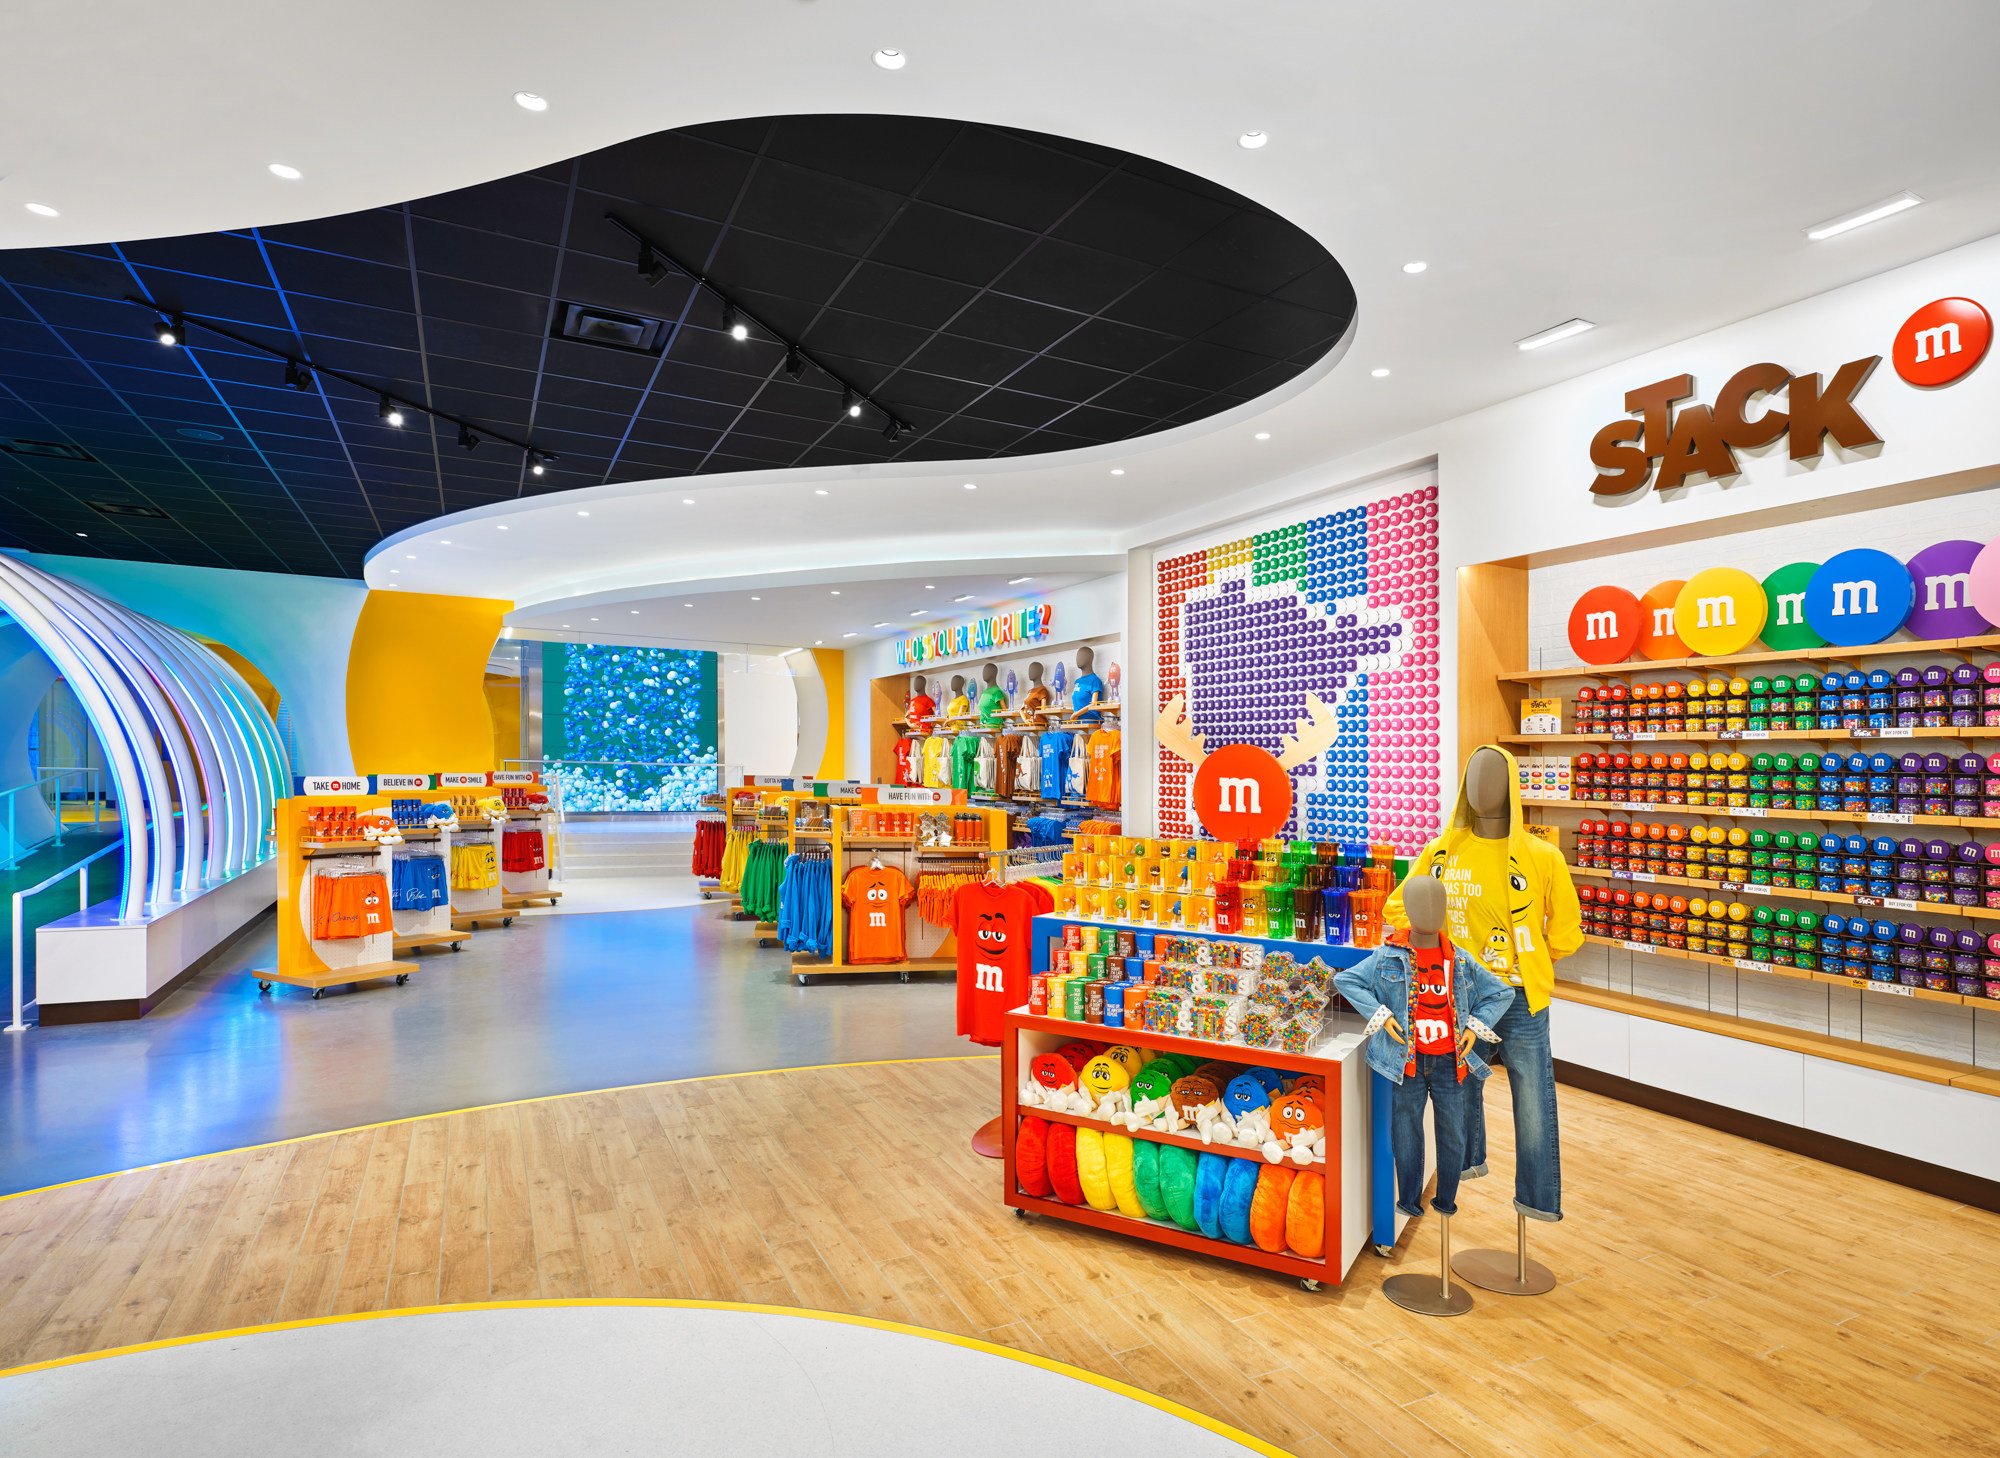 The Duggal Inno Lab designed, engineered and installed the digital displays that power M&M's Mall of America.